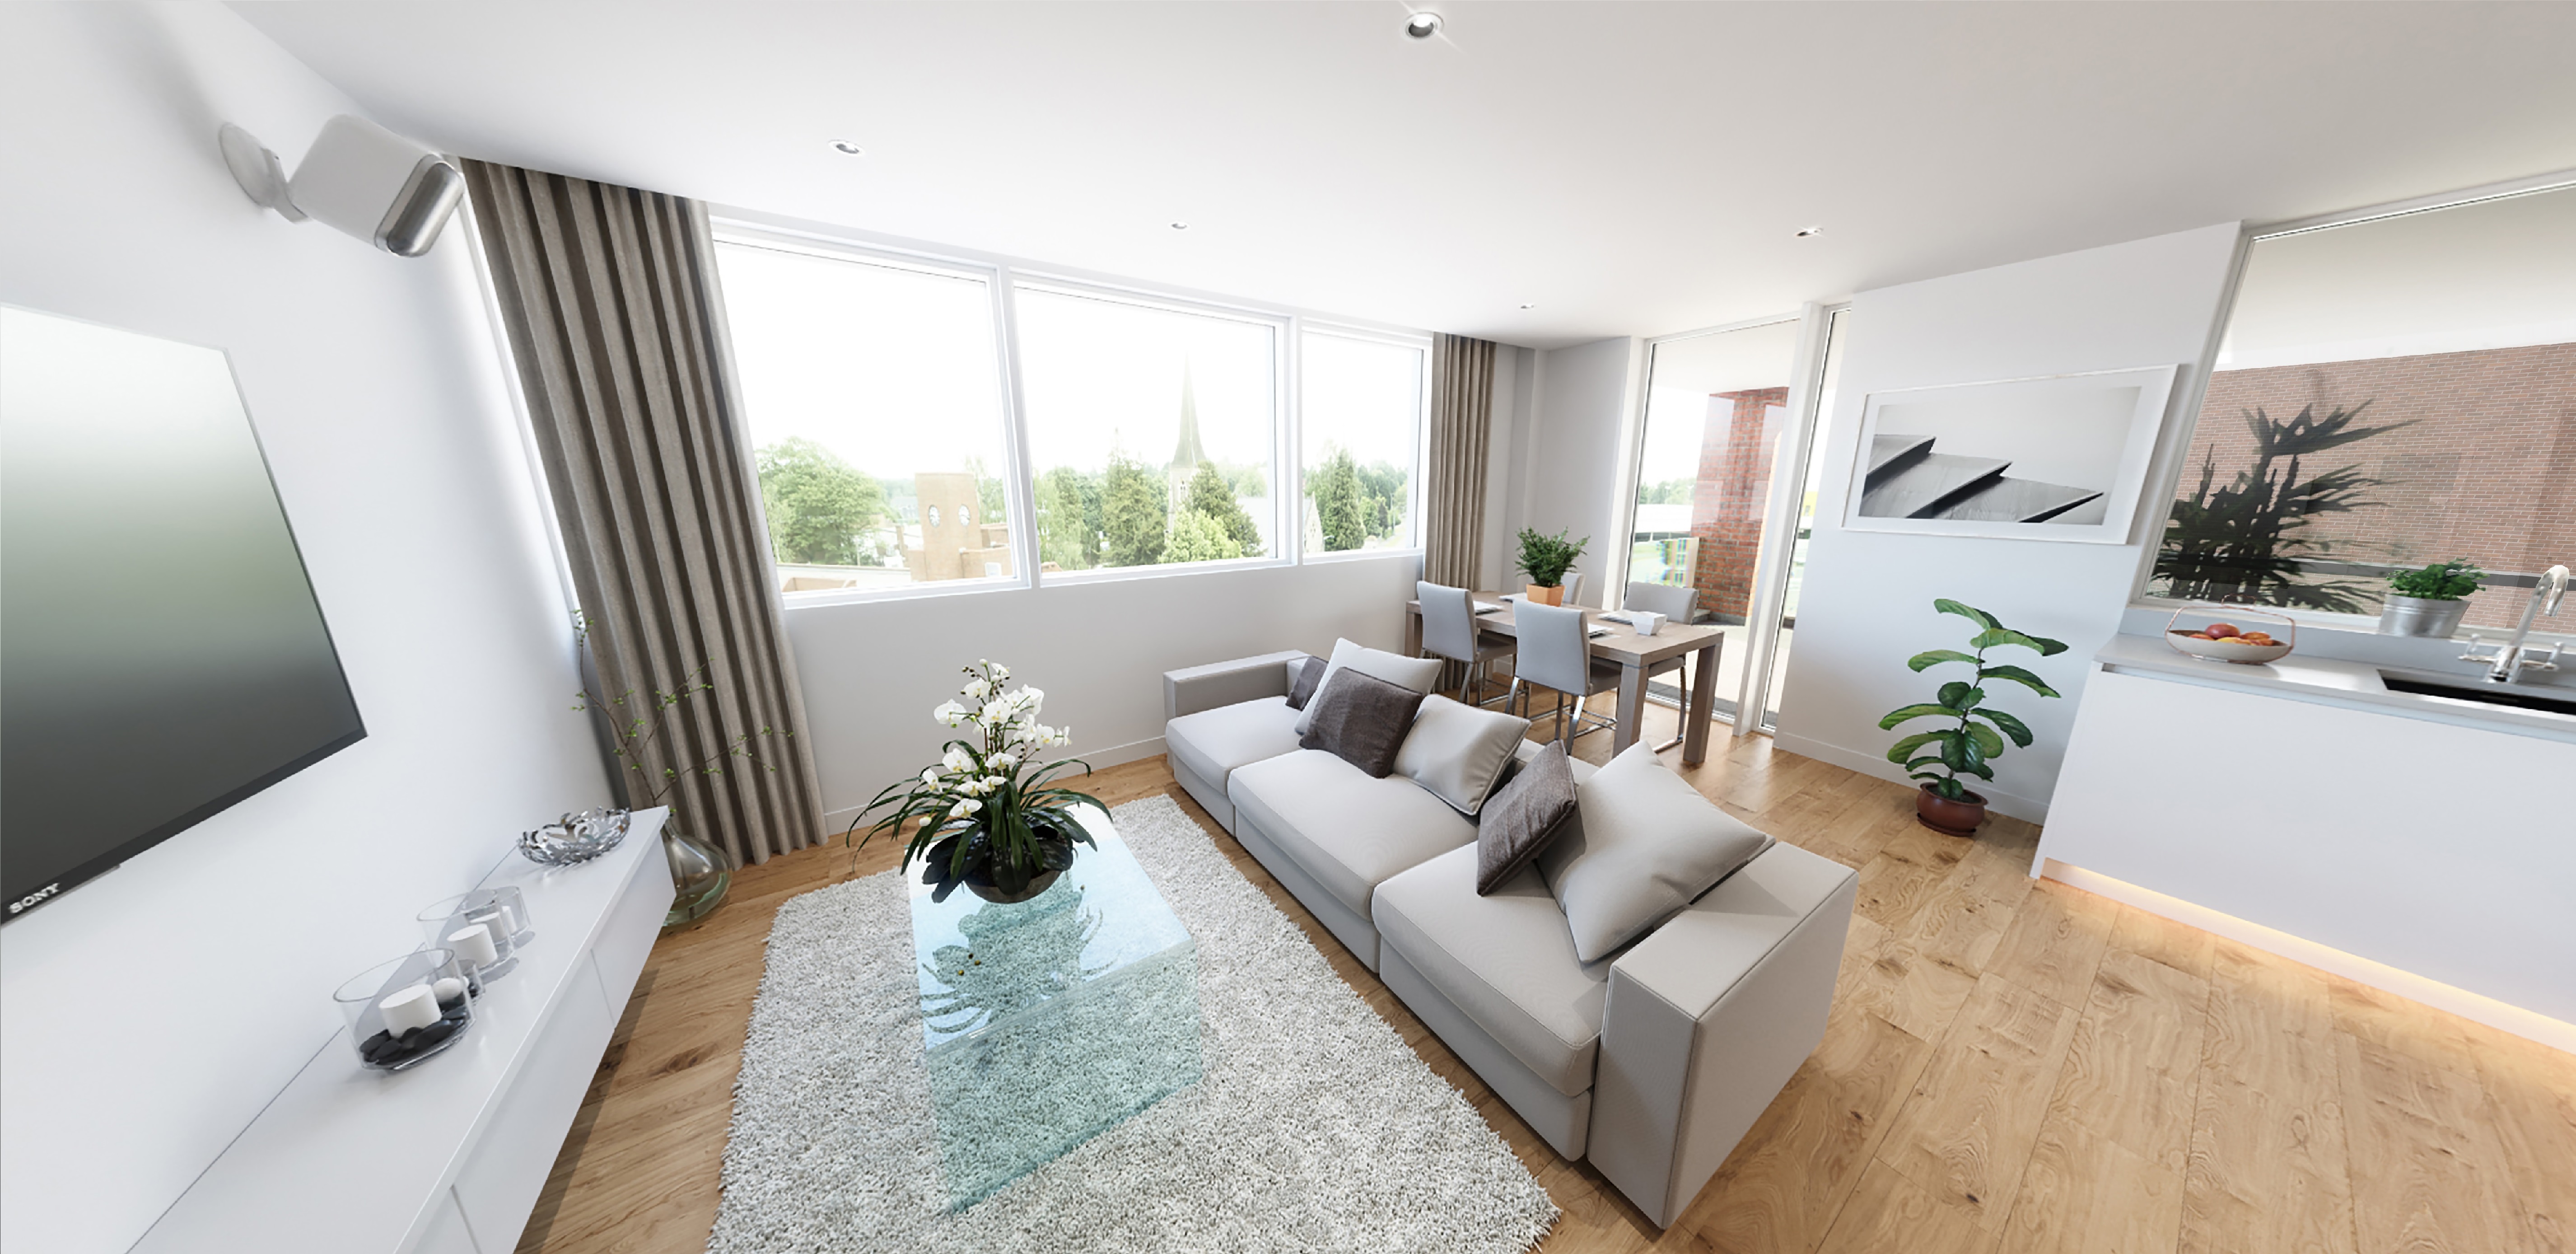 SHOW HOMES OPEN: CIRCA, Bracknell RG12, 69 Flats Available